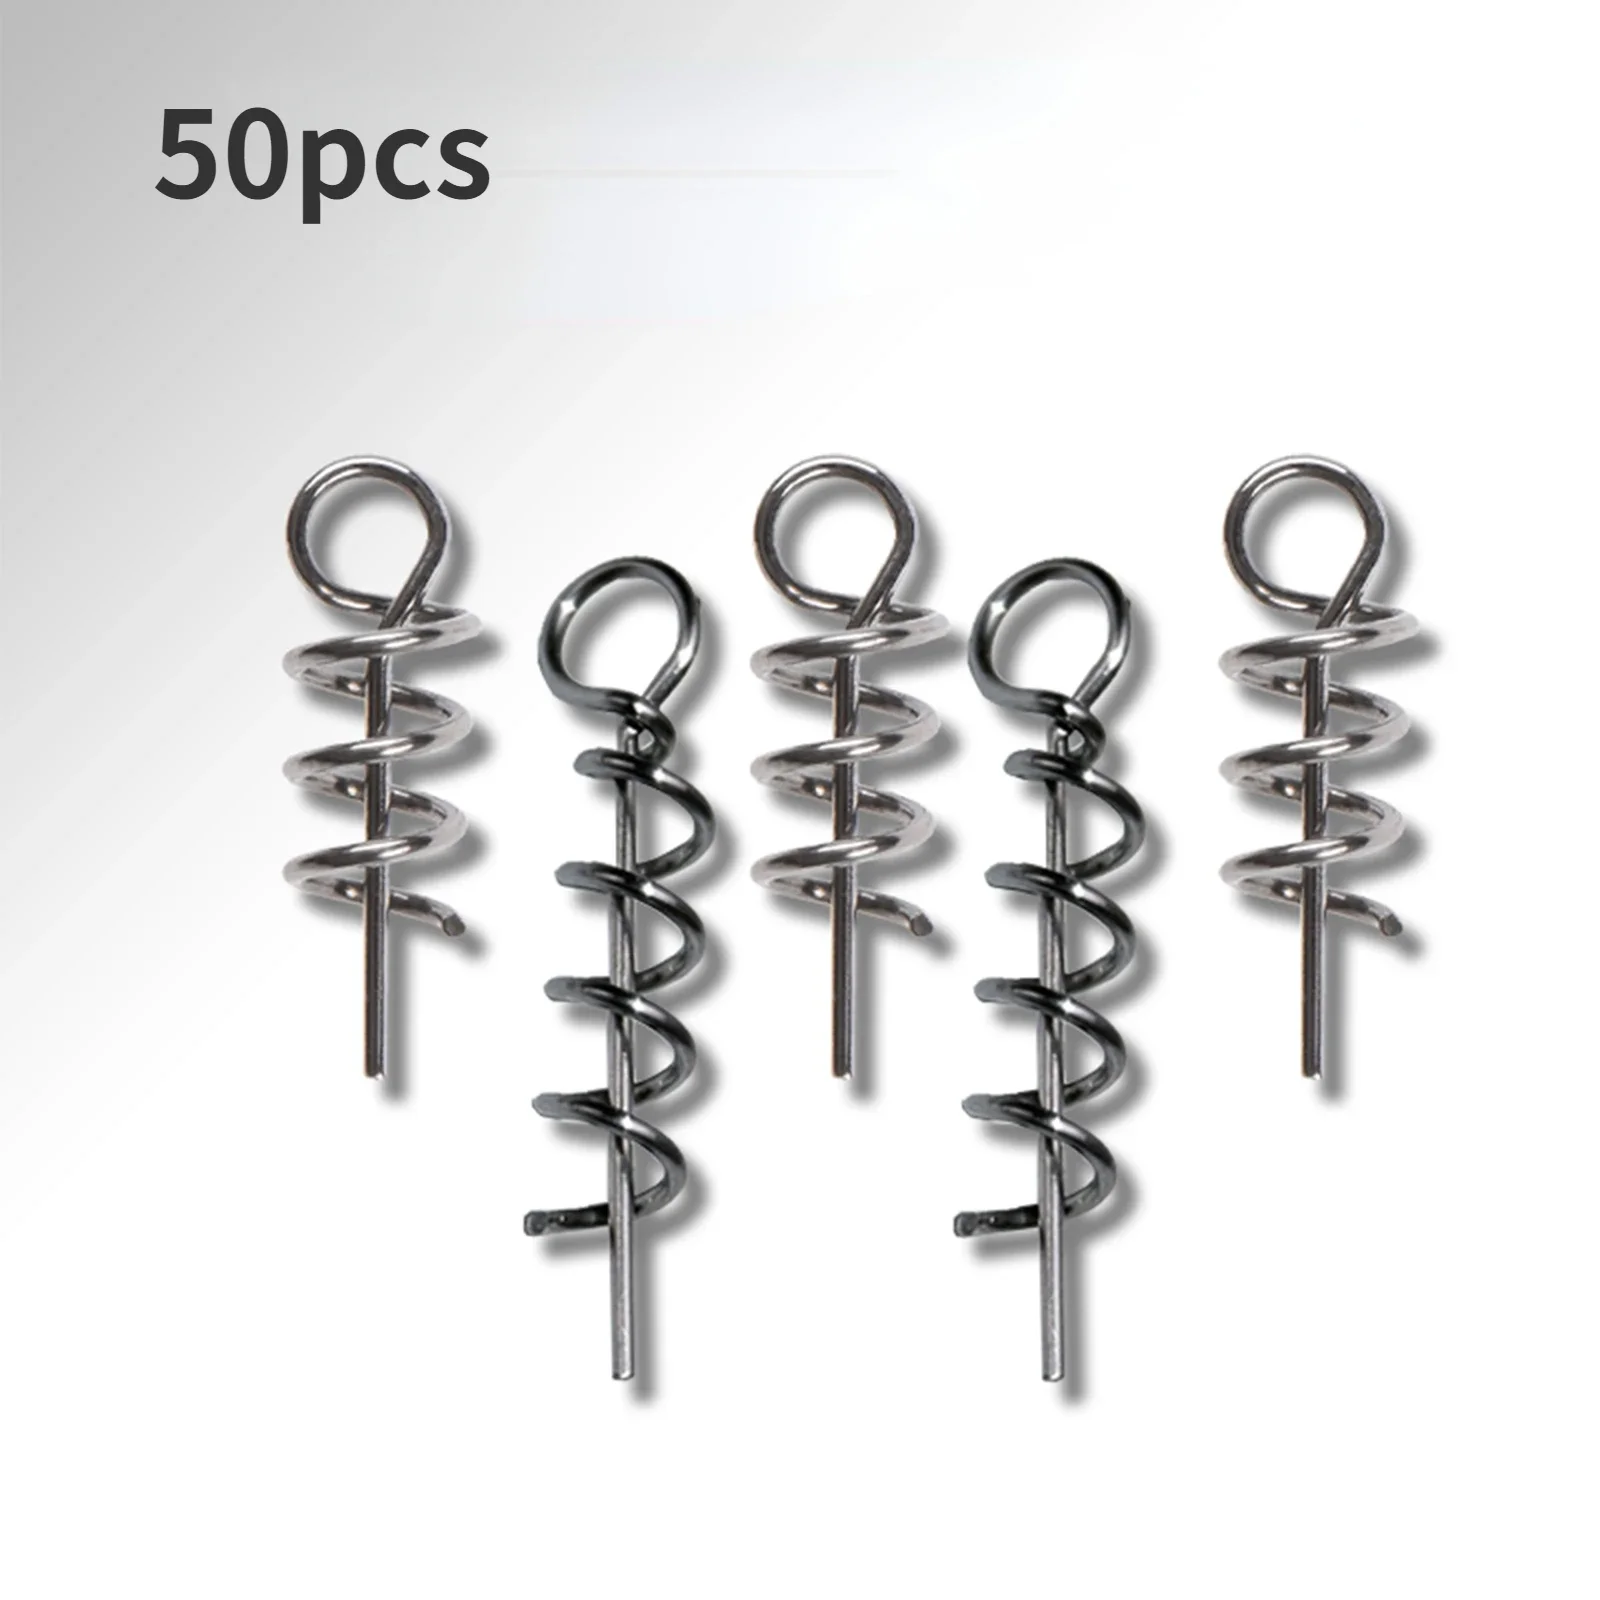 FOCARP 50pcs 15/35mm Soft Lure Bait Spring Twist Lock Fishing Hook  Stainless Steel Centering Pin for Soft Lure Bait Worm Crank - AliExpress